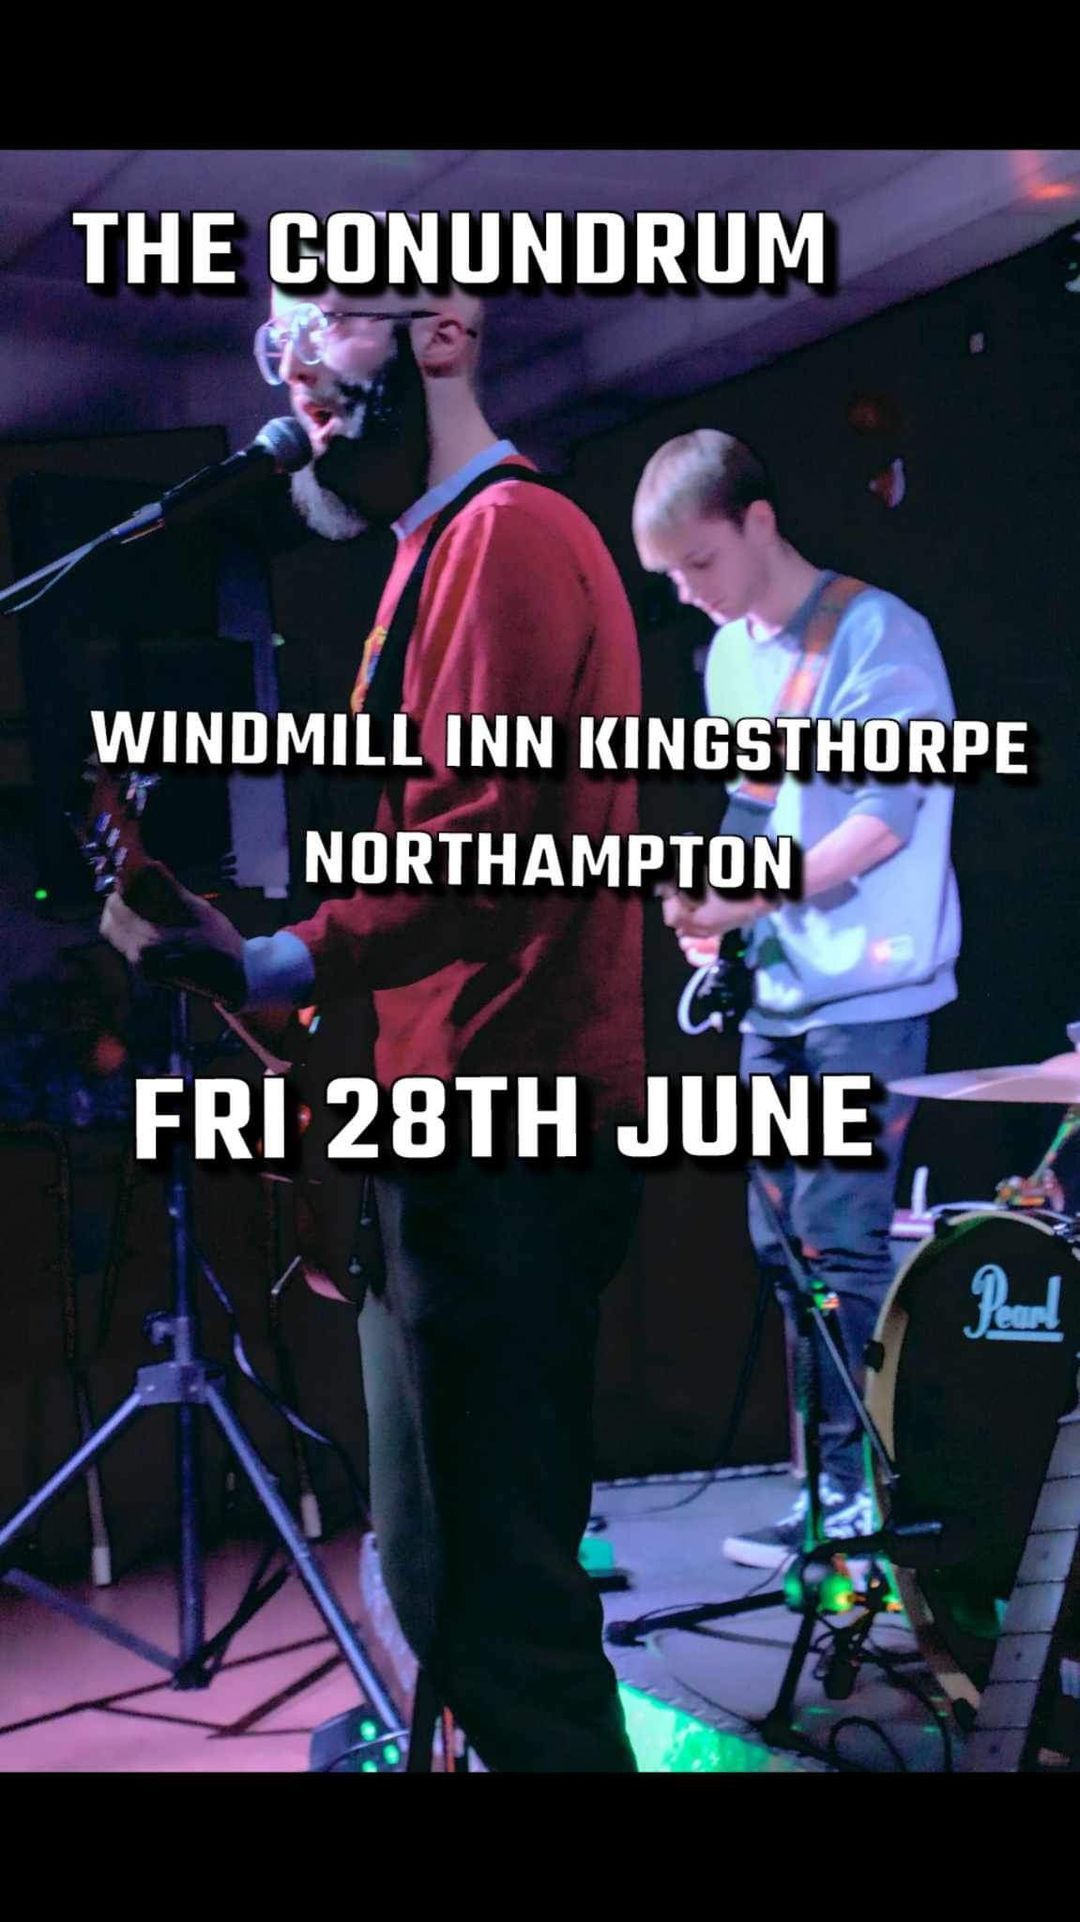 The Conundrum @ The Windmill, Kingsthorpe 